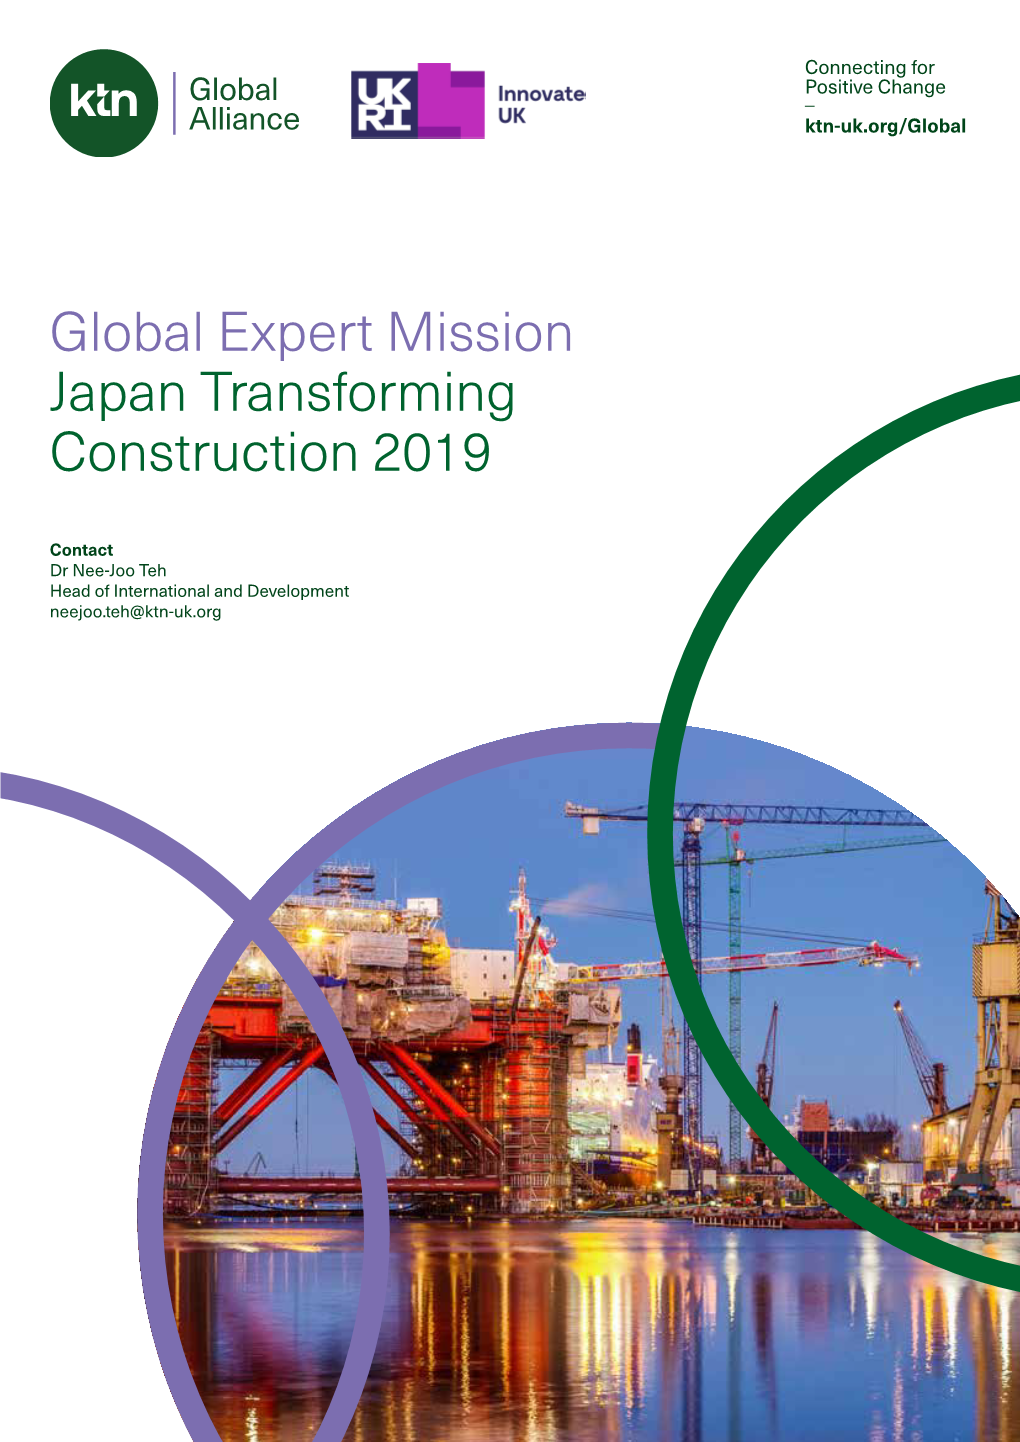 Global Expert Mission Japan Transforming Construction 2019